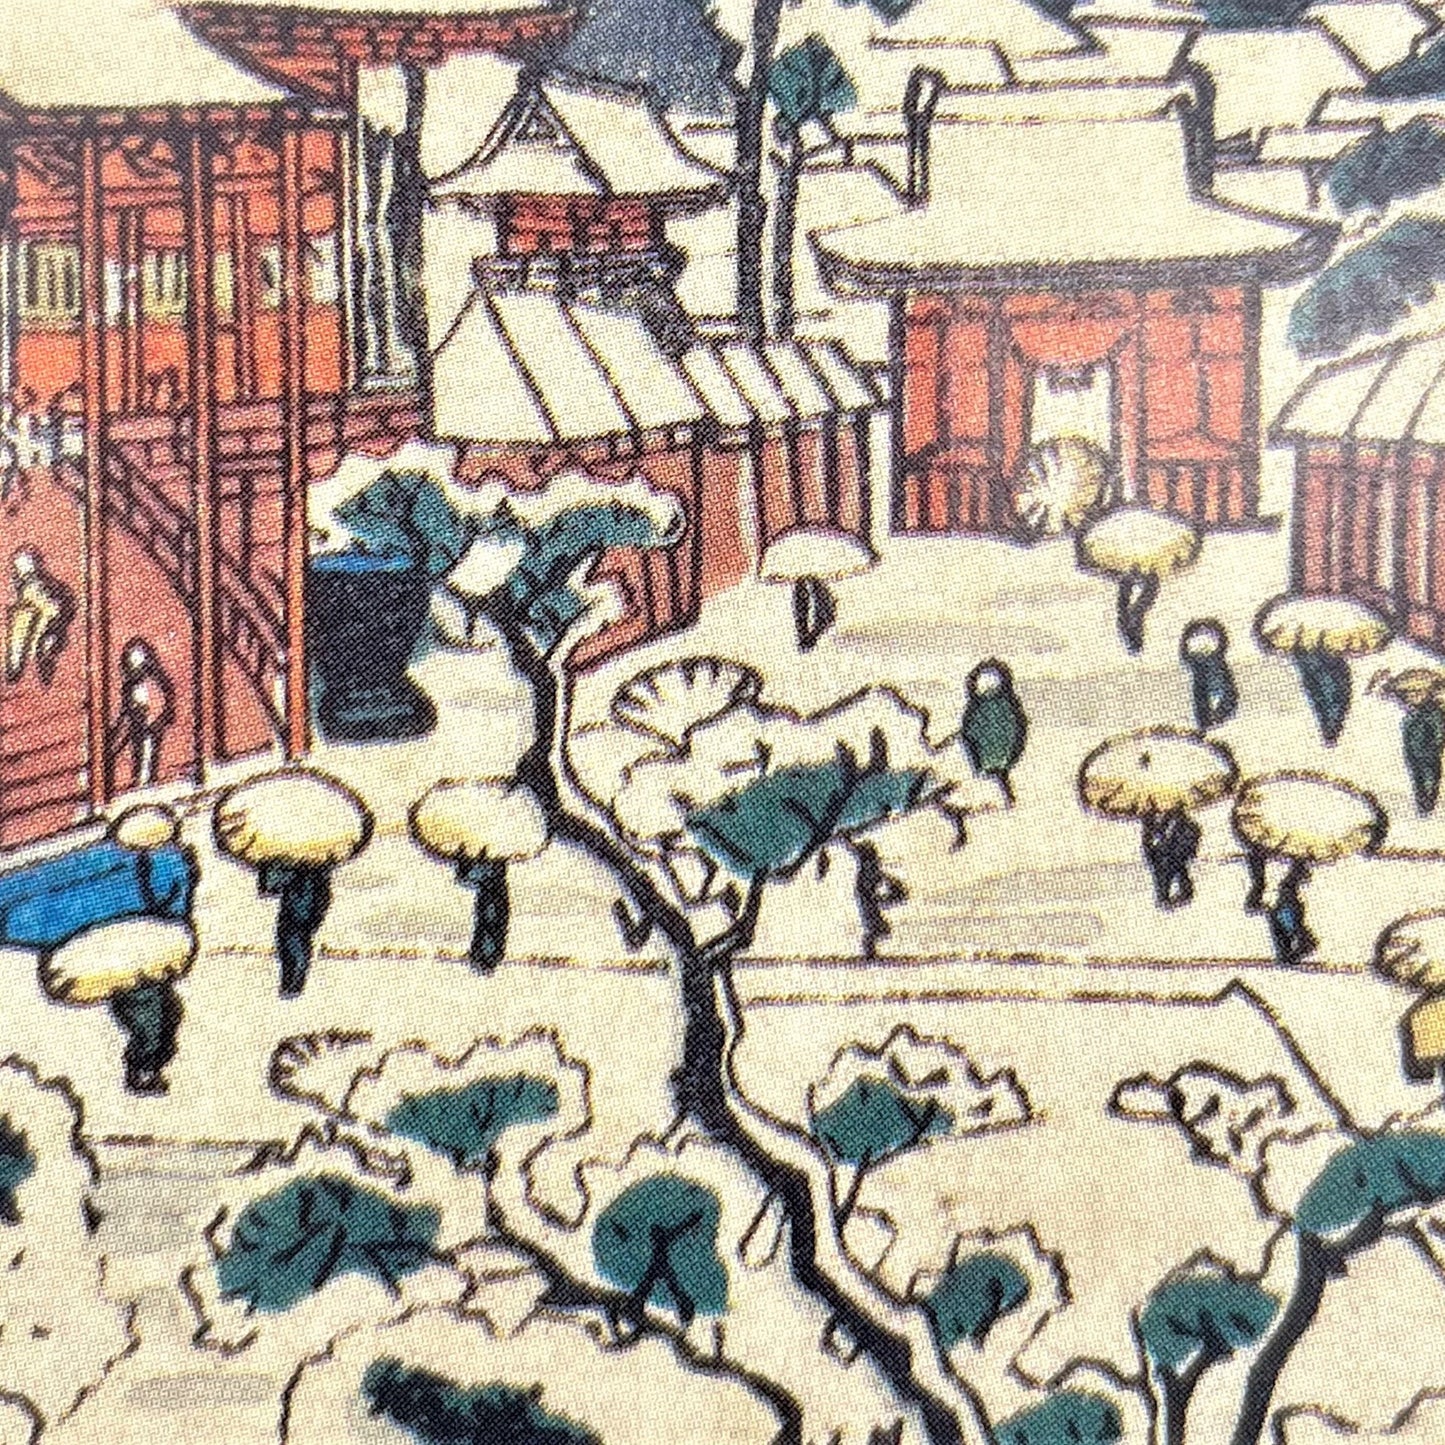 greetings card of senso-ji temple in the snow, close-up detail